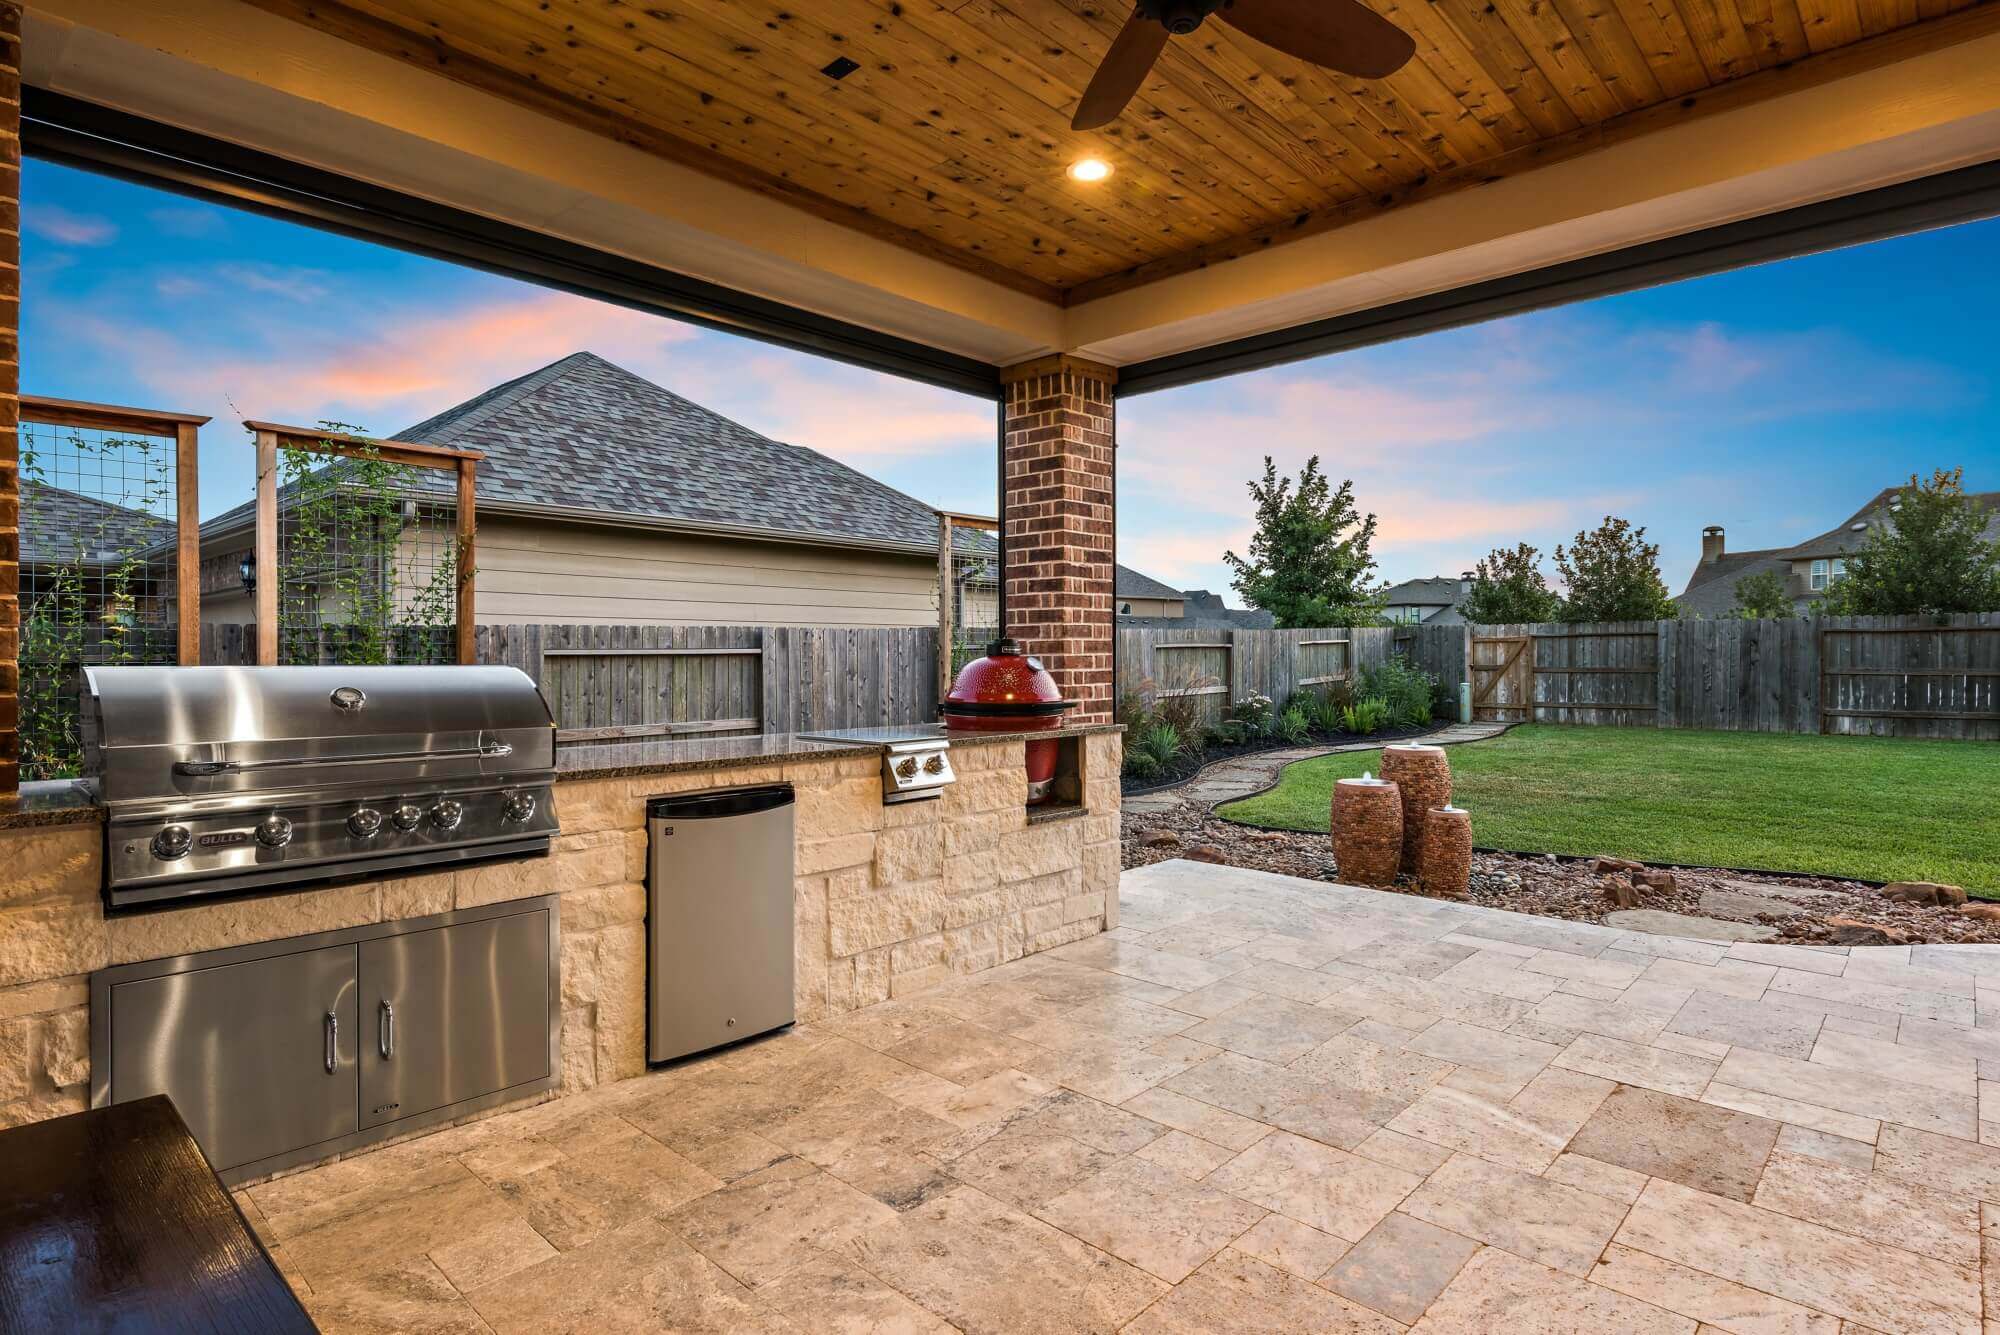 Perfect outdoor kitchen and grill set up for backyard dinner plans